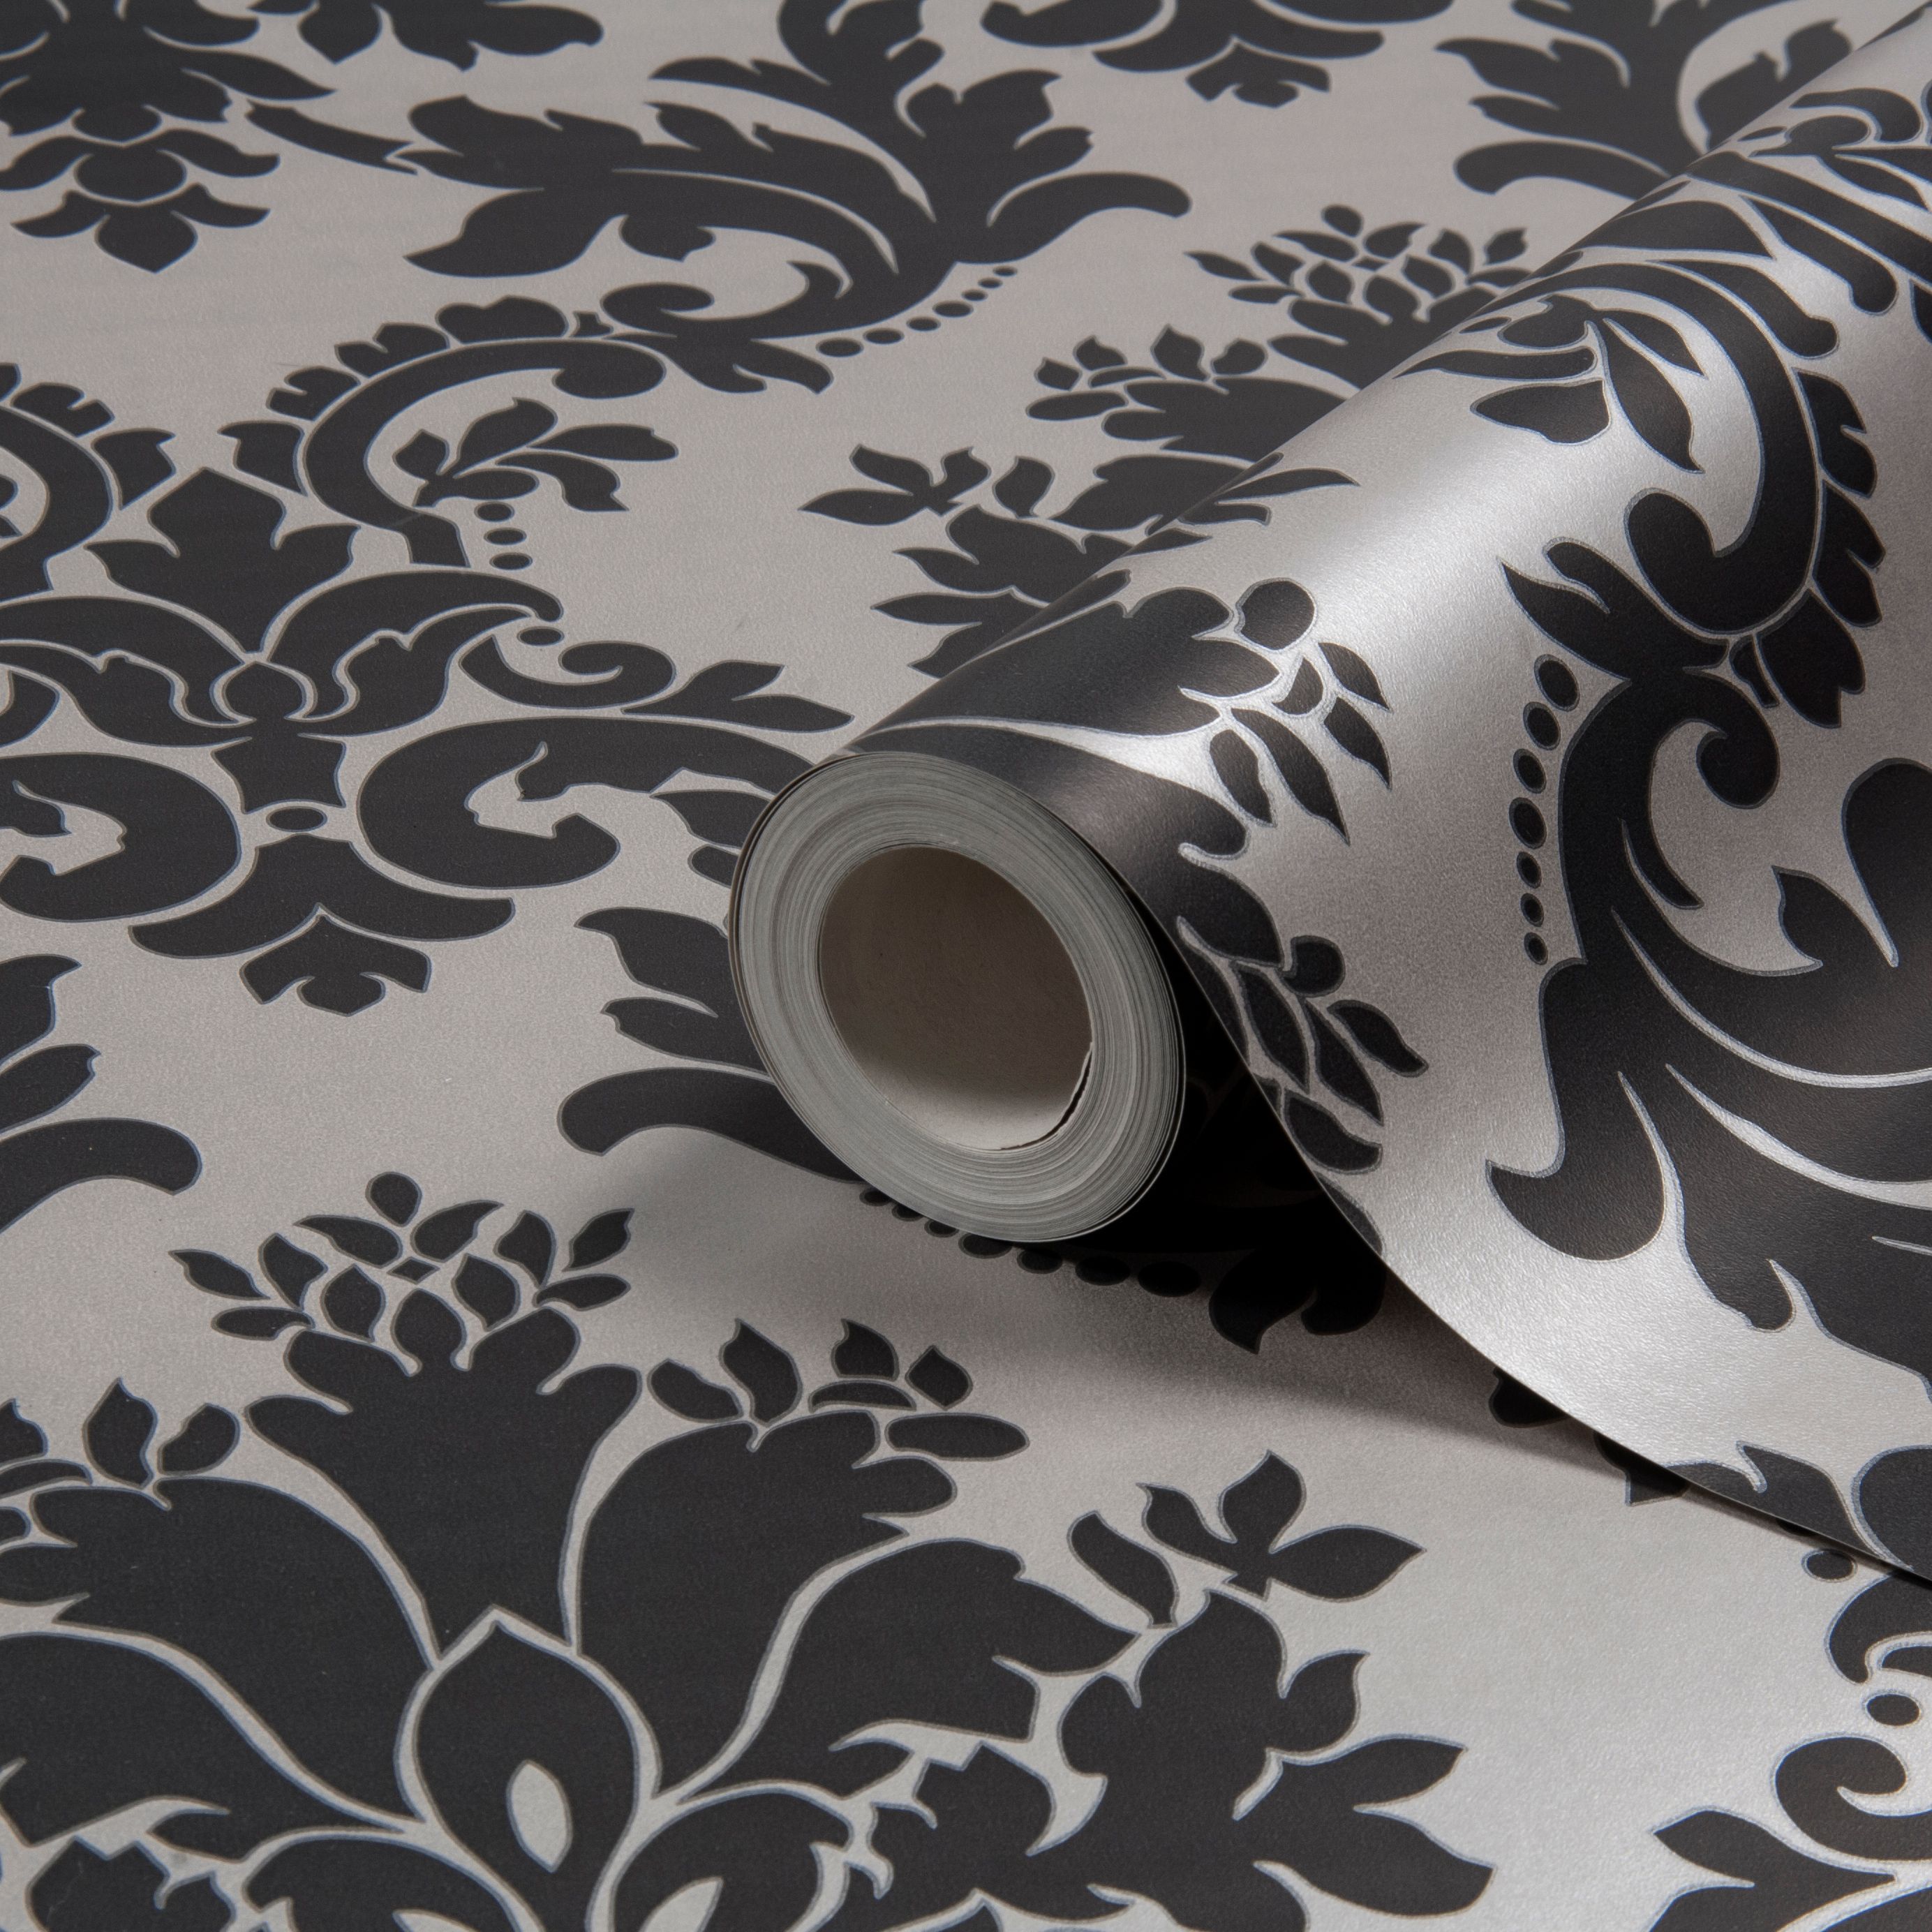 Silver On Black Damask Wallpaper Roll Top Quality Wall - Arthouse Opera Byron Black , HD Wallpaper & Backgrounds